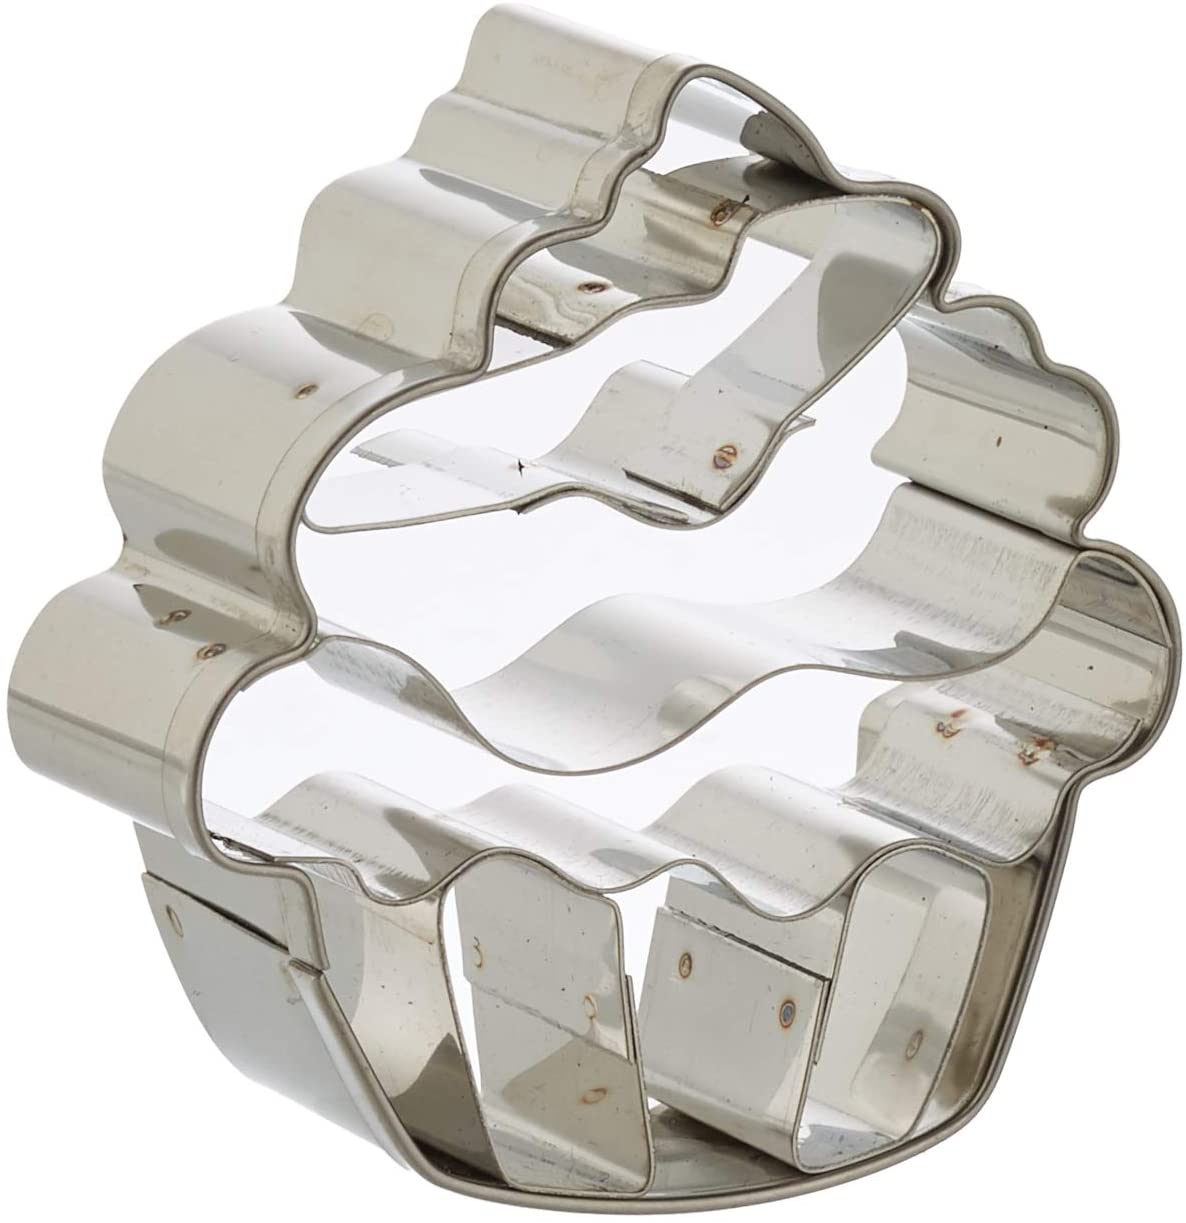 Staedter Städter 199675 Cookie Cutter Muffin-Shaped 5.5 cm Stainless Steel